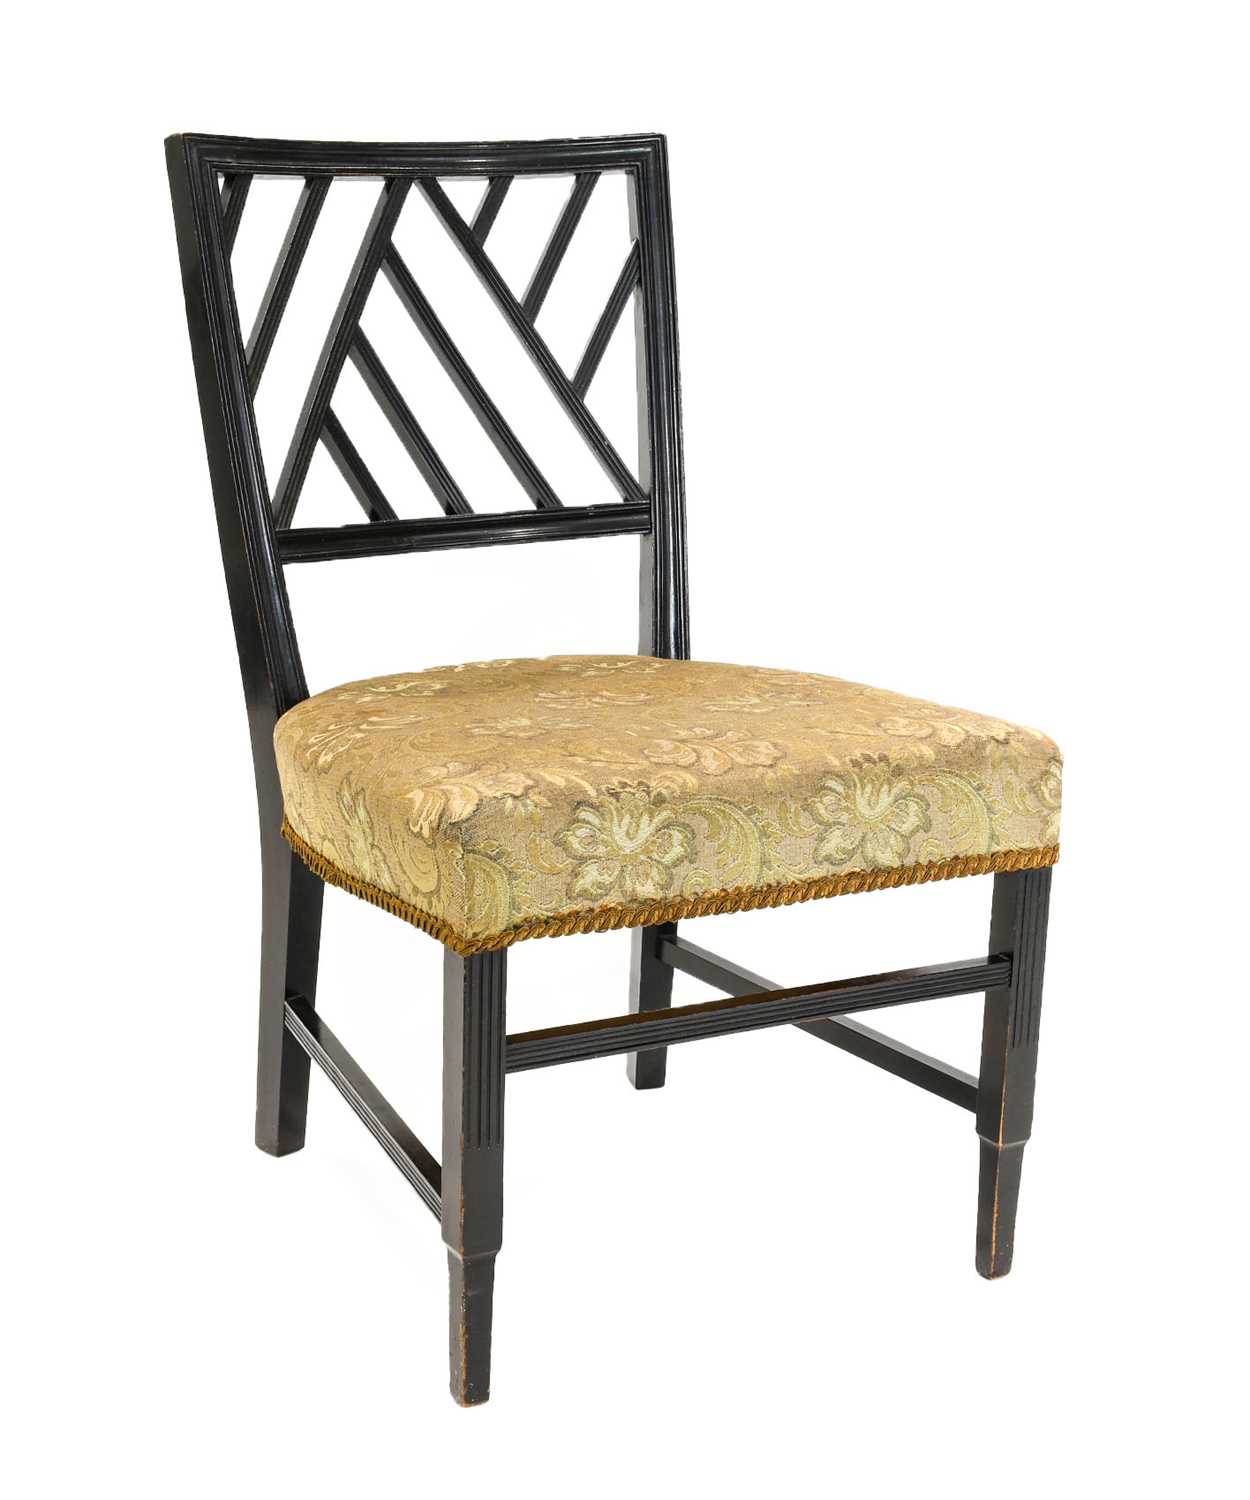 Edward William Godwin (1833-1886) for William Watt: An Anglo-Japanese Ebonised Beech Side Chair,